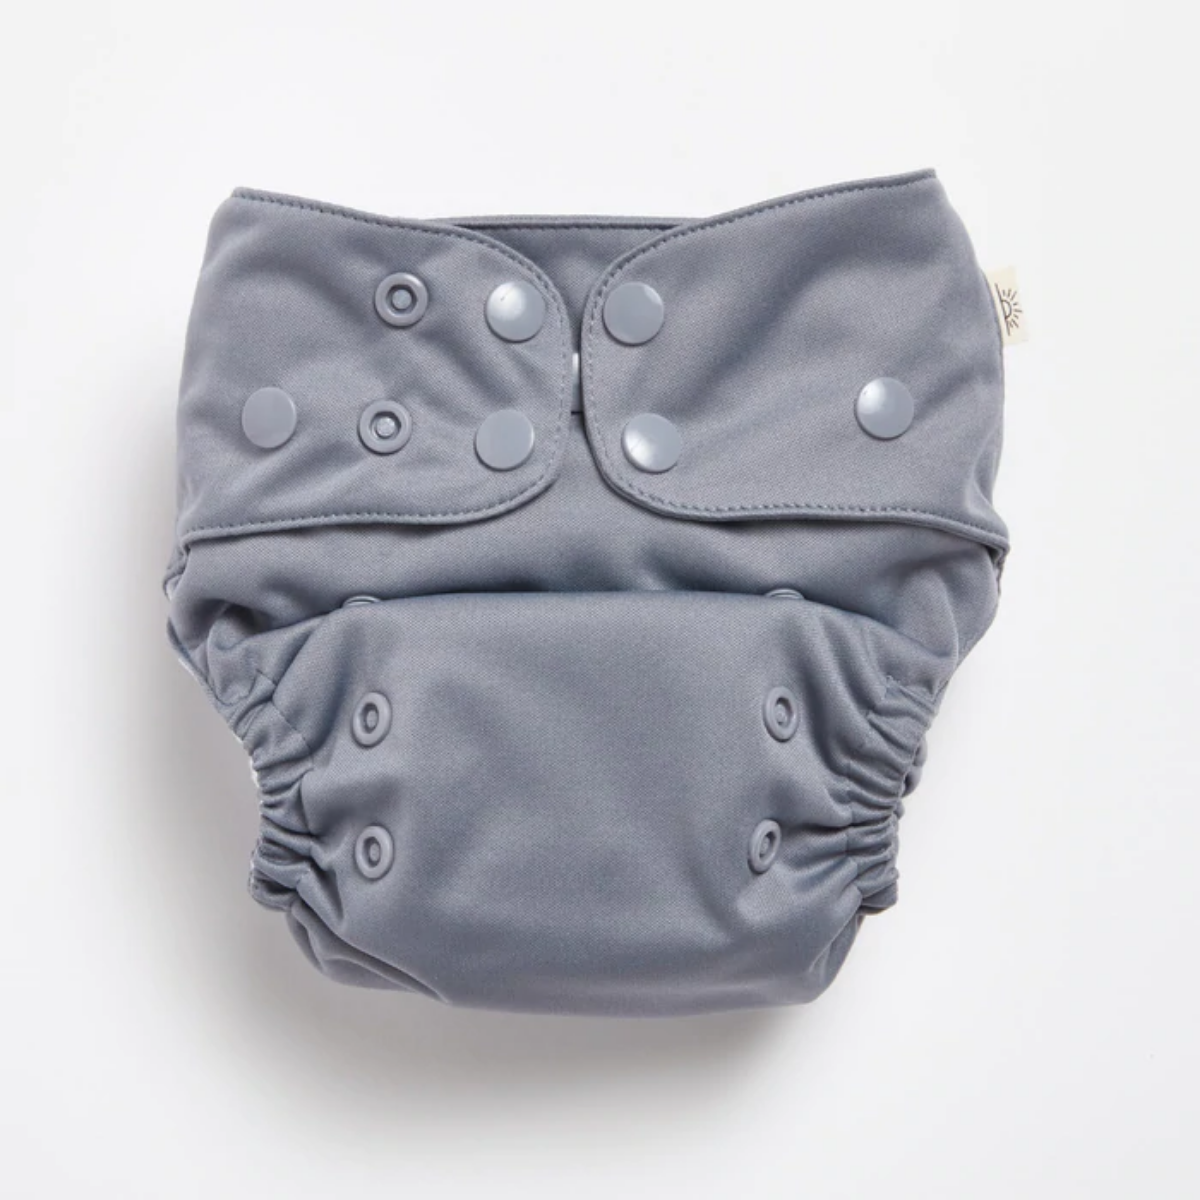 A Midnight Blue 2.0 Modern Cloth Nappy from EcoNaps on a white background.